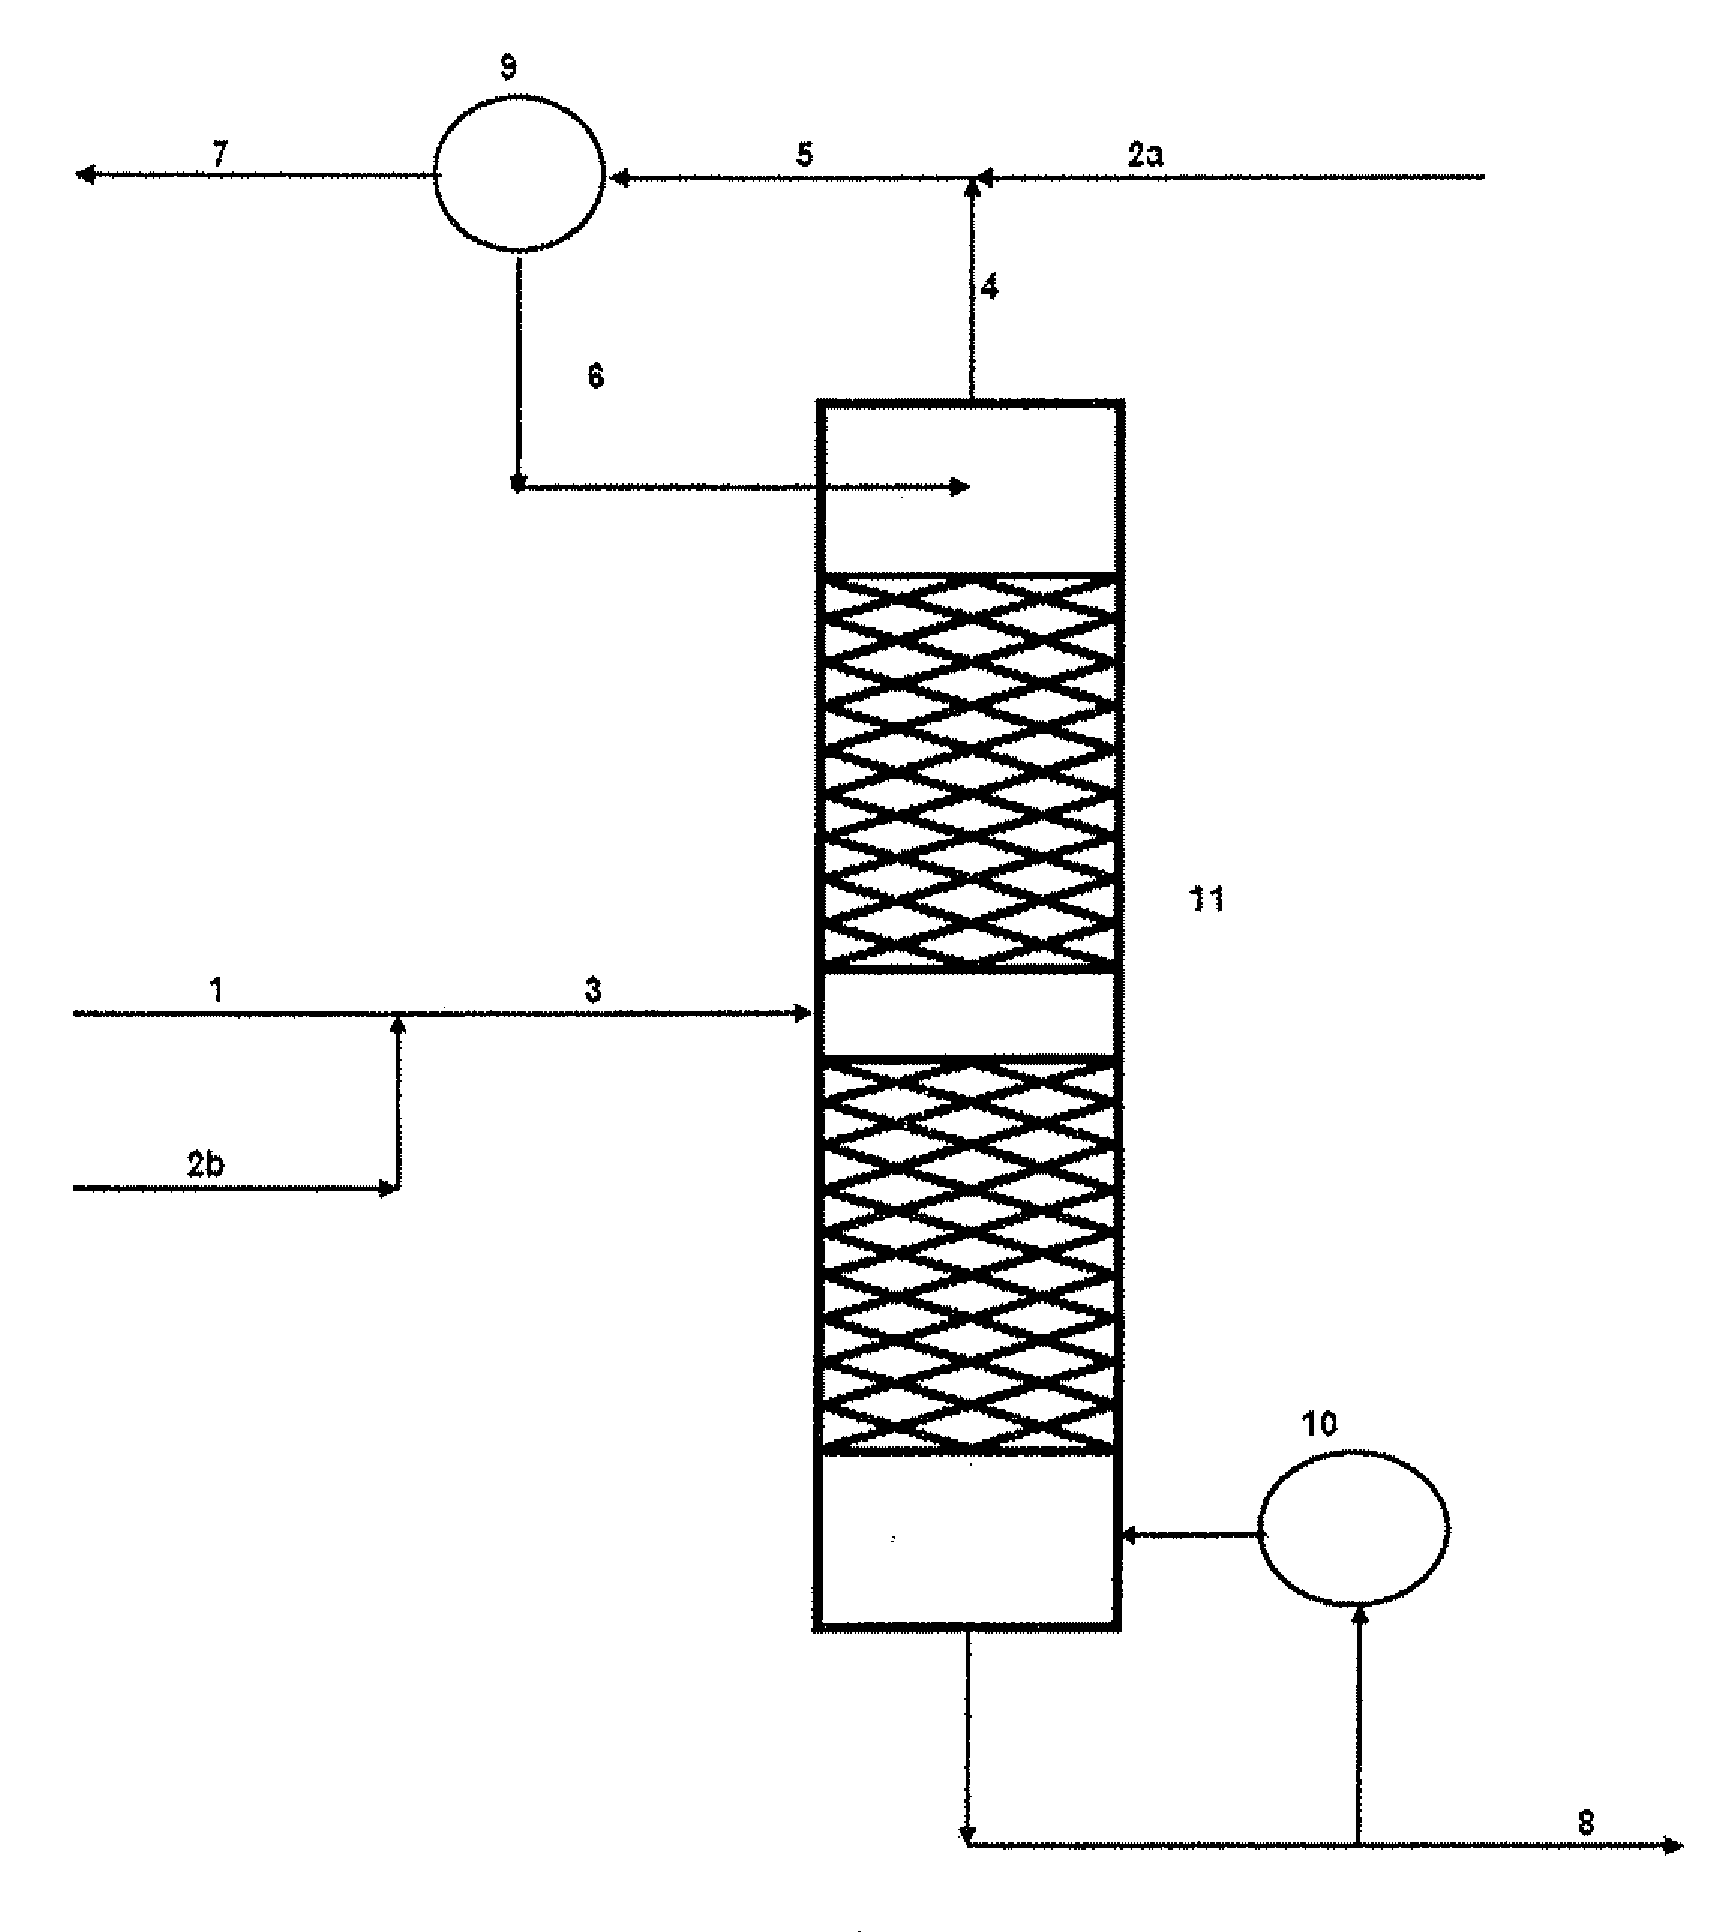 Processes for separating chlorine from a gas stream containing chlorine, oxygen and carbon dioxide